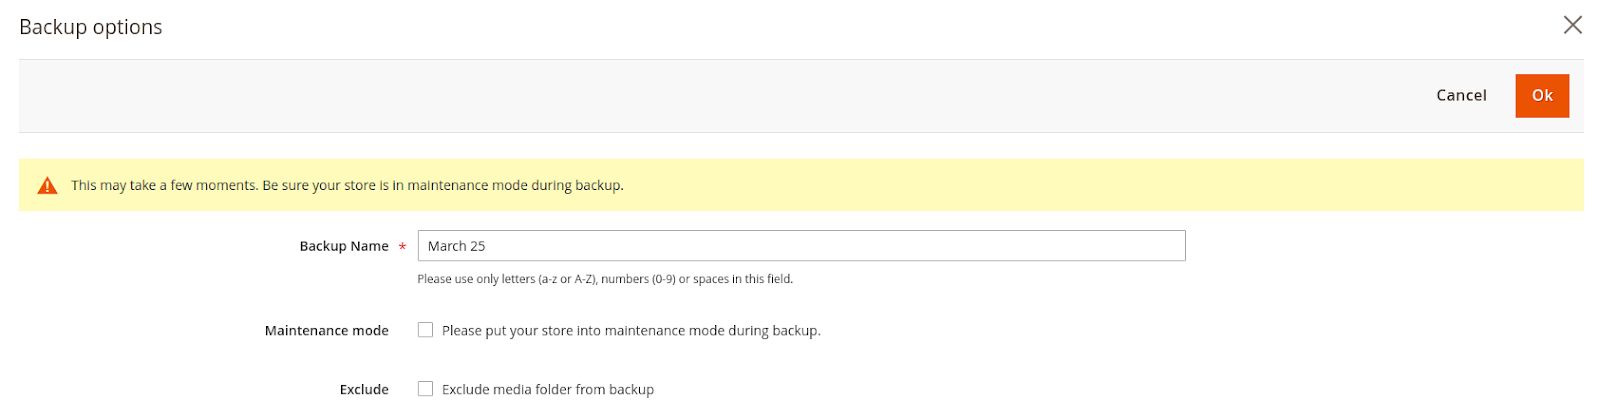 click Ok and a Magento backup will start running